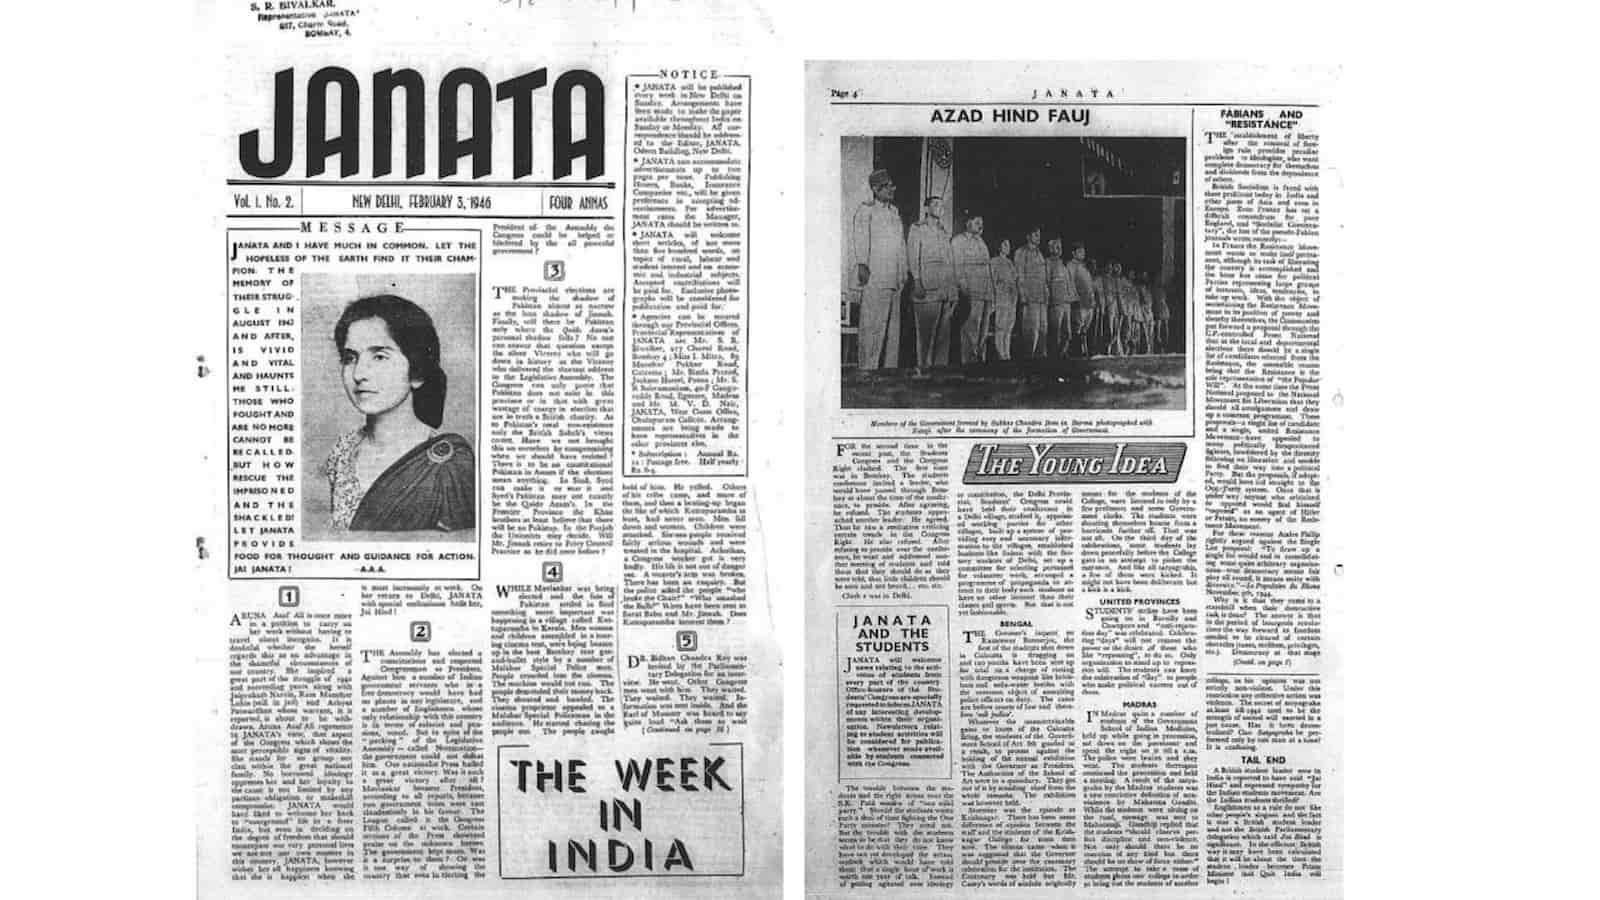 An early edition of Janata Weekly from 1946